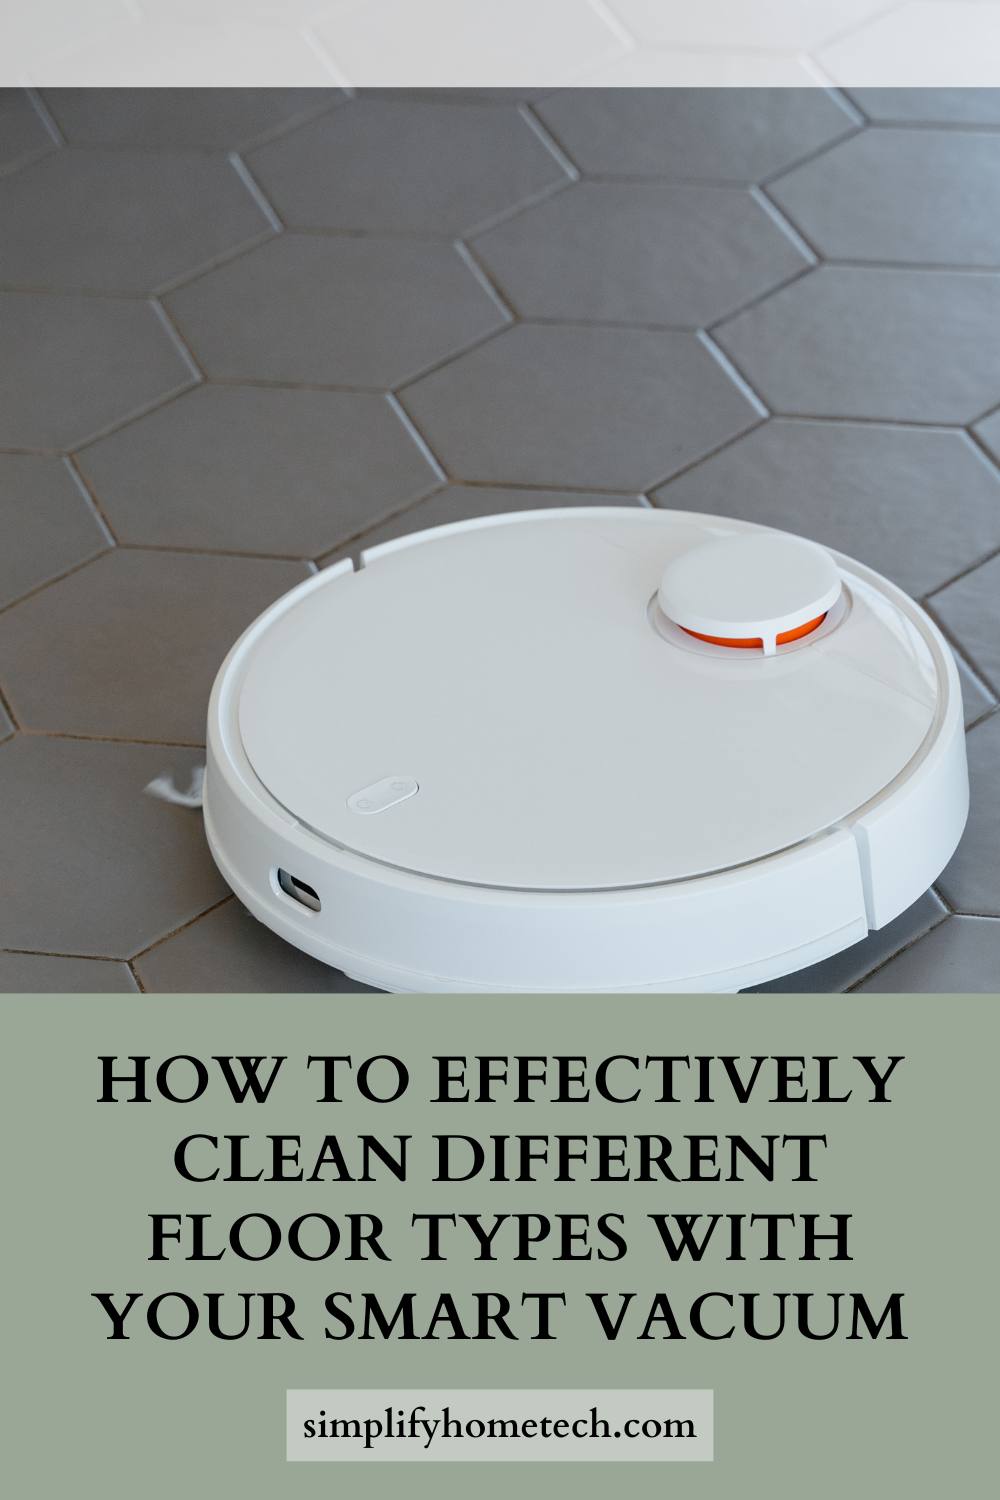 How to Effectively Clean Different Floor Types with Your Smart Vacuum